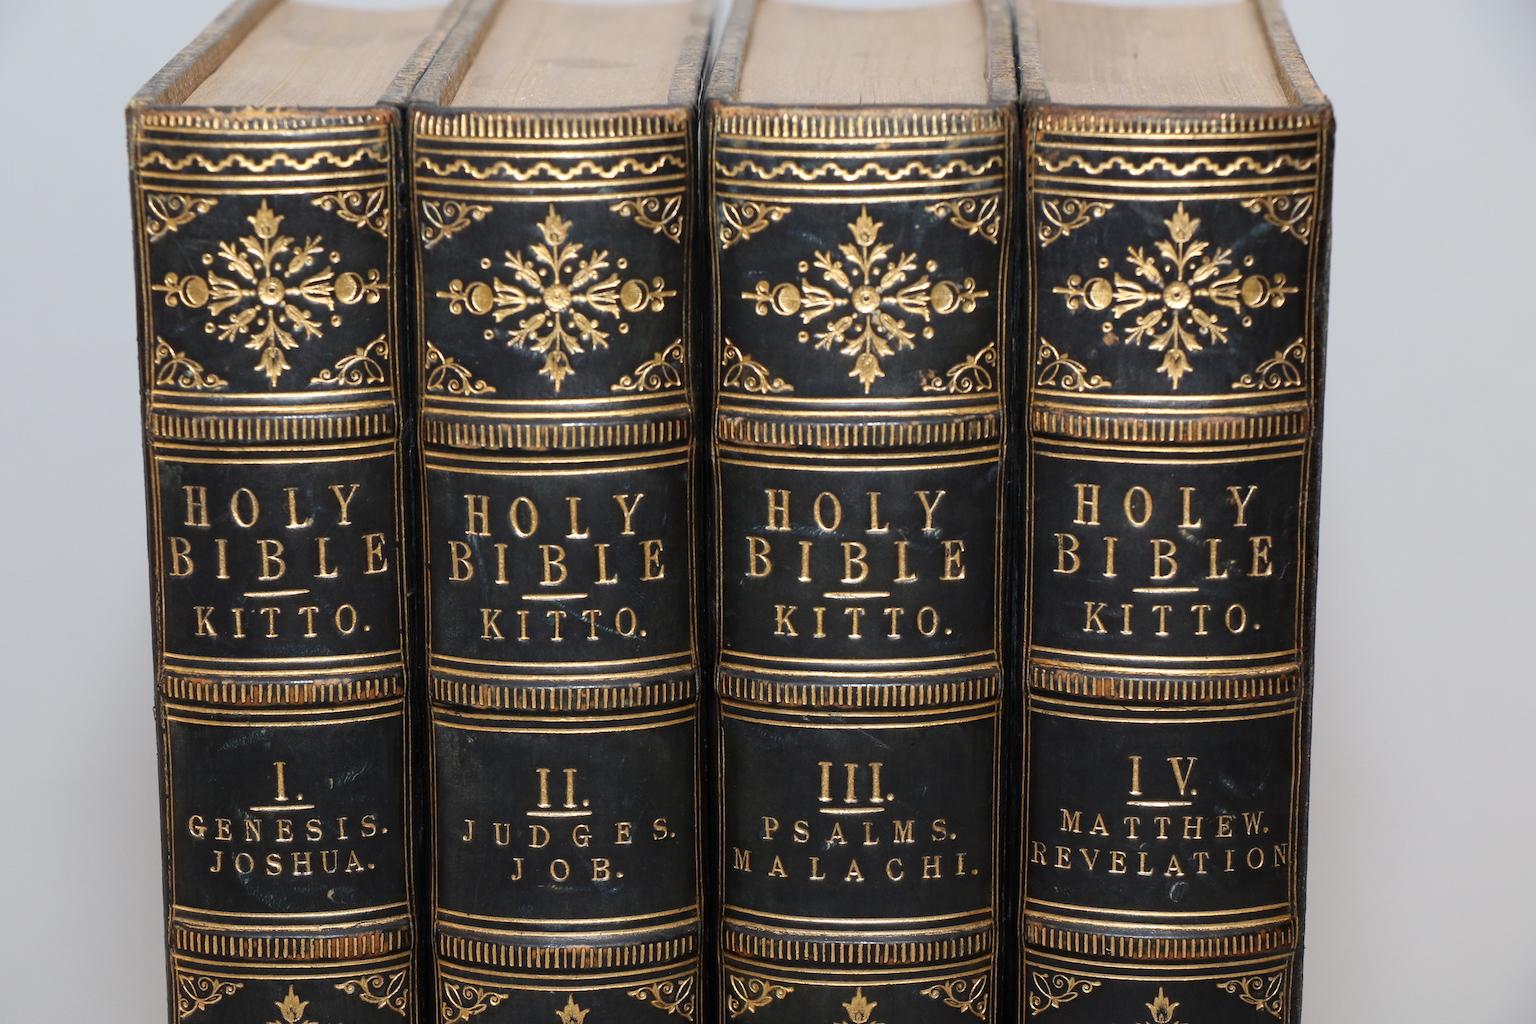 4 volumes. Quartos. Bound in full blue calf with all edges gilt, raised bands, and ornate gilt on spines. Profusely illustrated throughout! Published in London by Charles Knight in 1847.